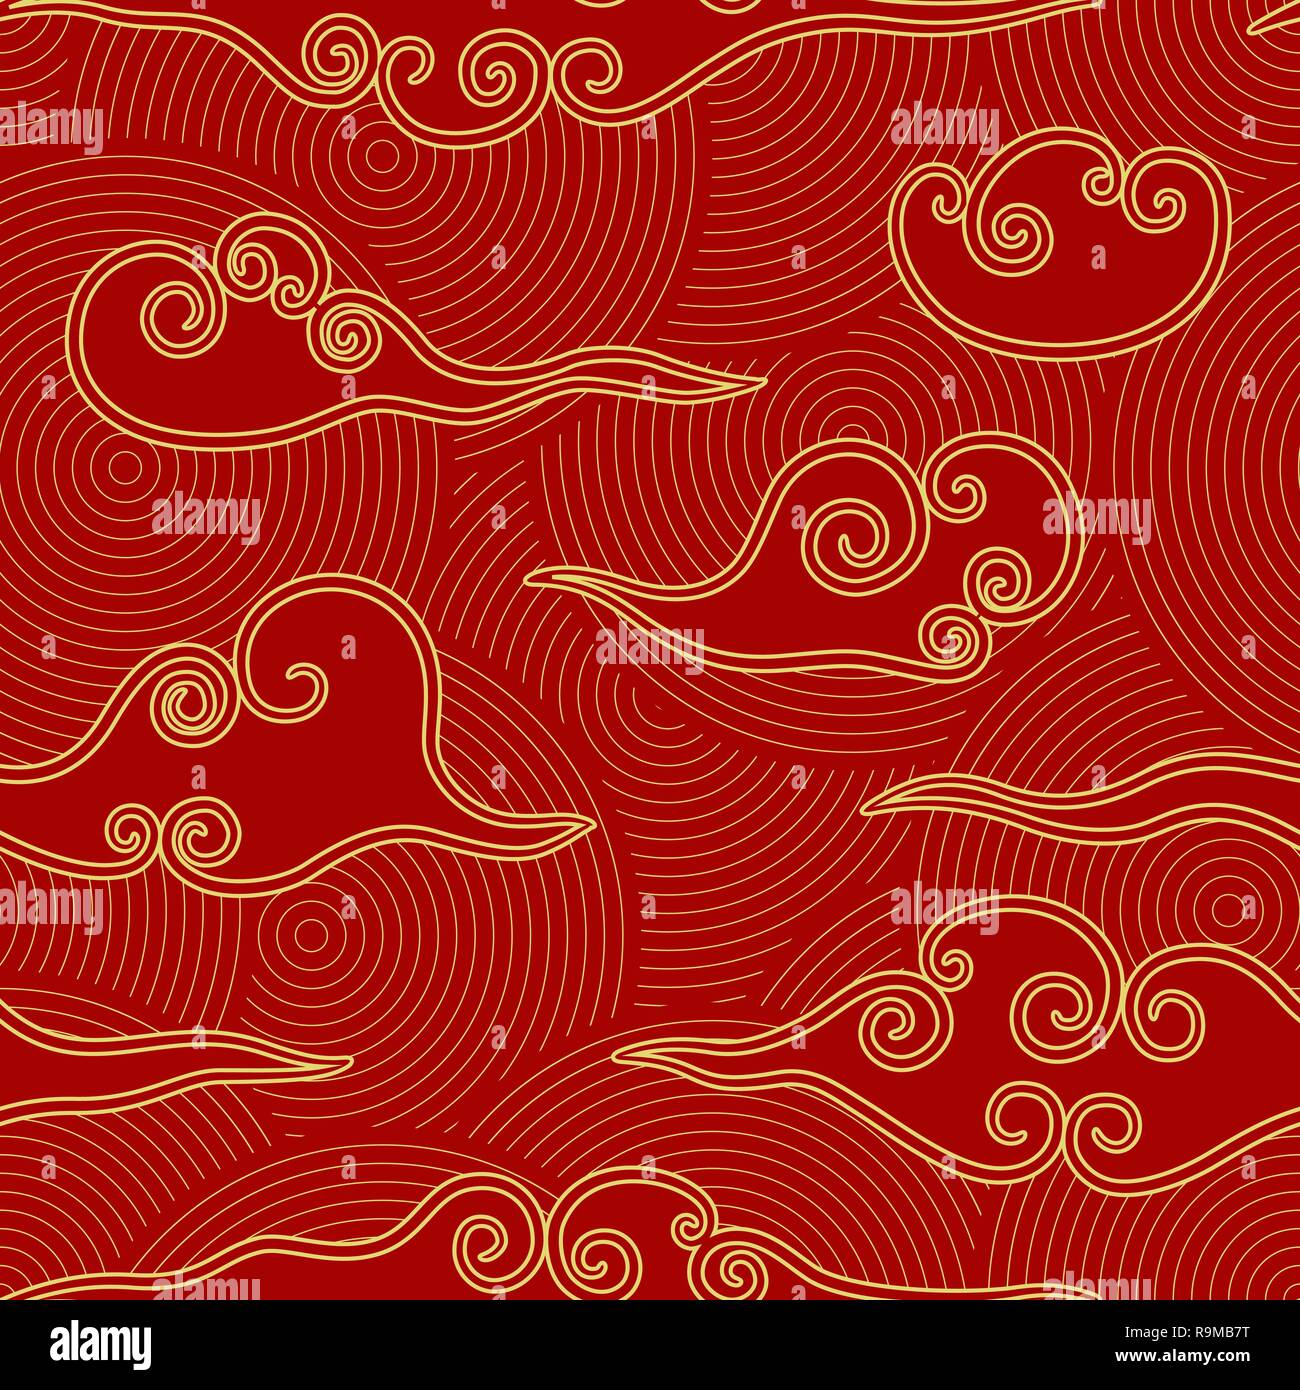 https://c8.alamy.com/comp/R9MB7T/chinese-style-clouds-red-and-gold-seamless-pattern-R9MB7T.jpg